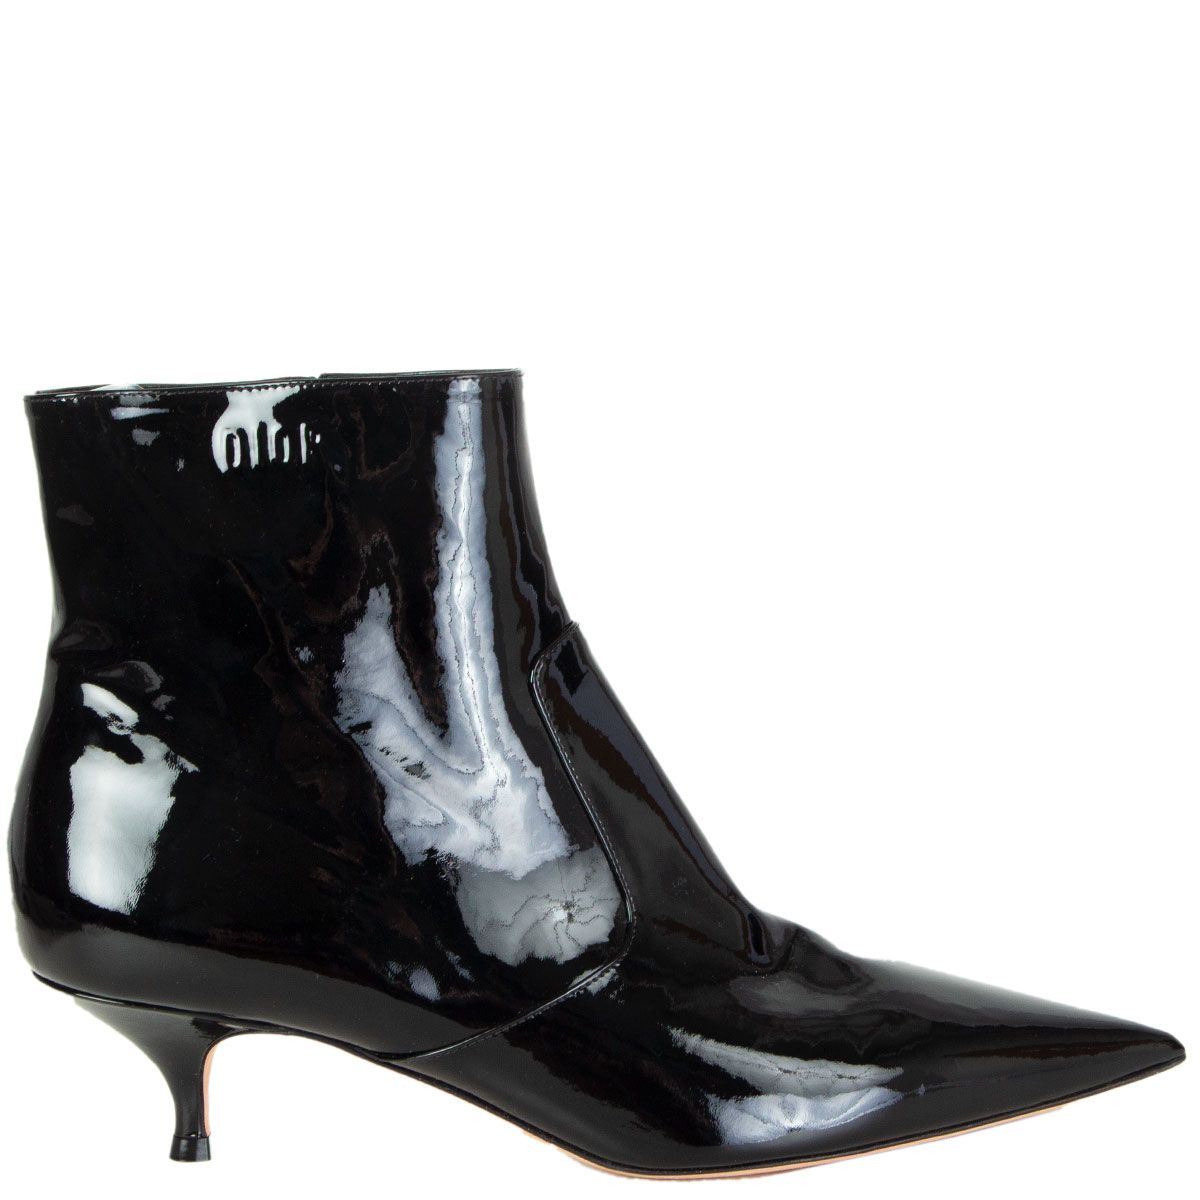 Christian Dior Kitten Heel Patent Leather Ankle Boots